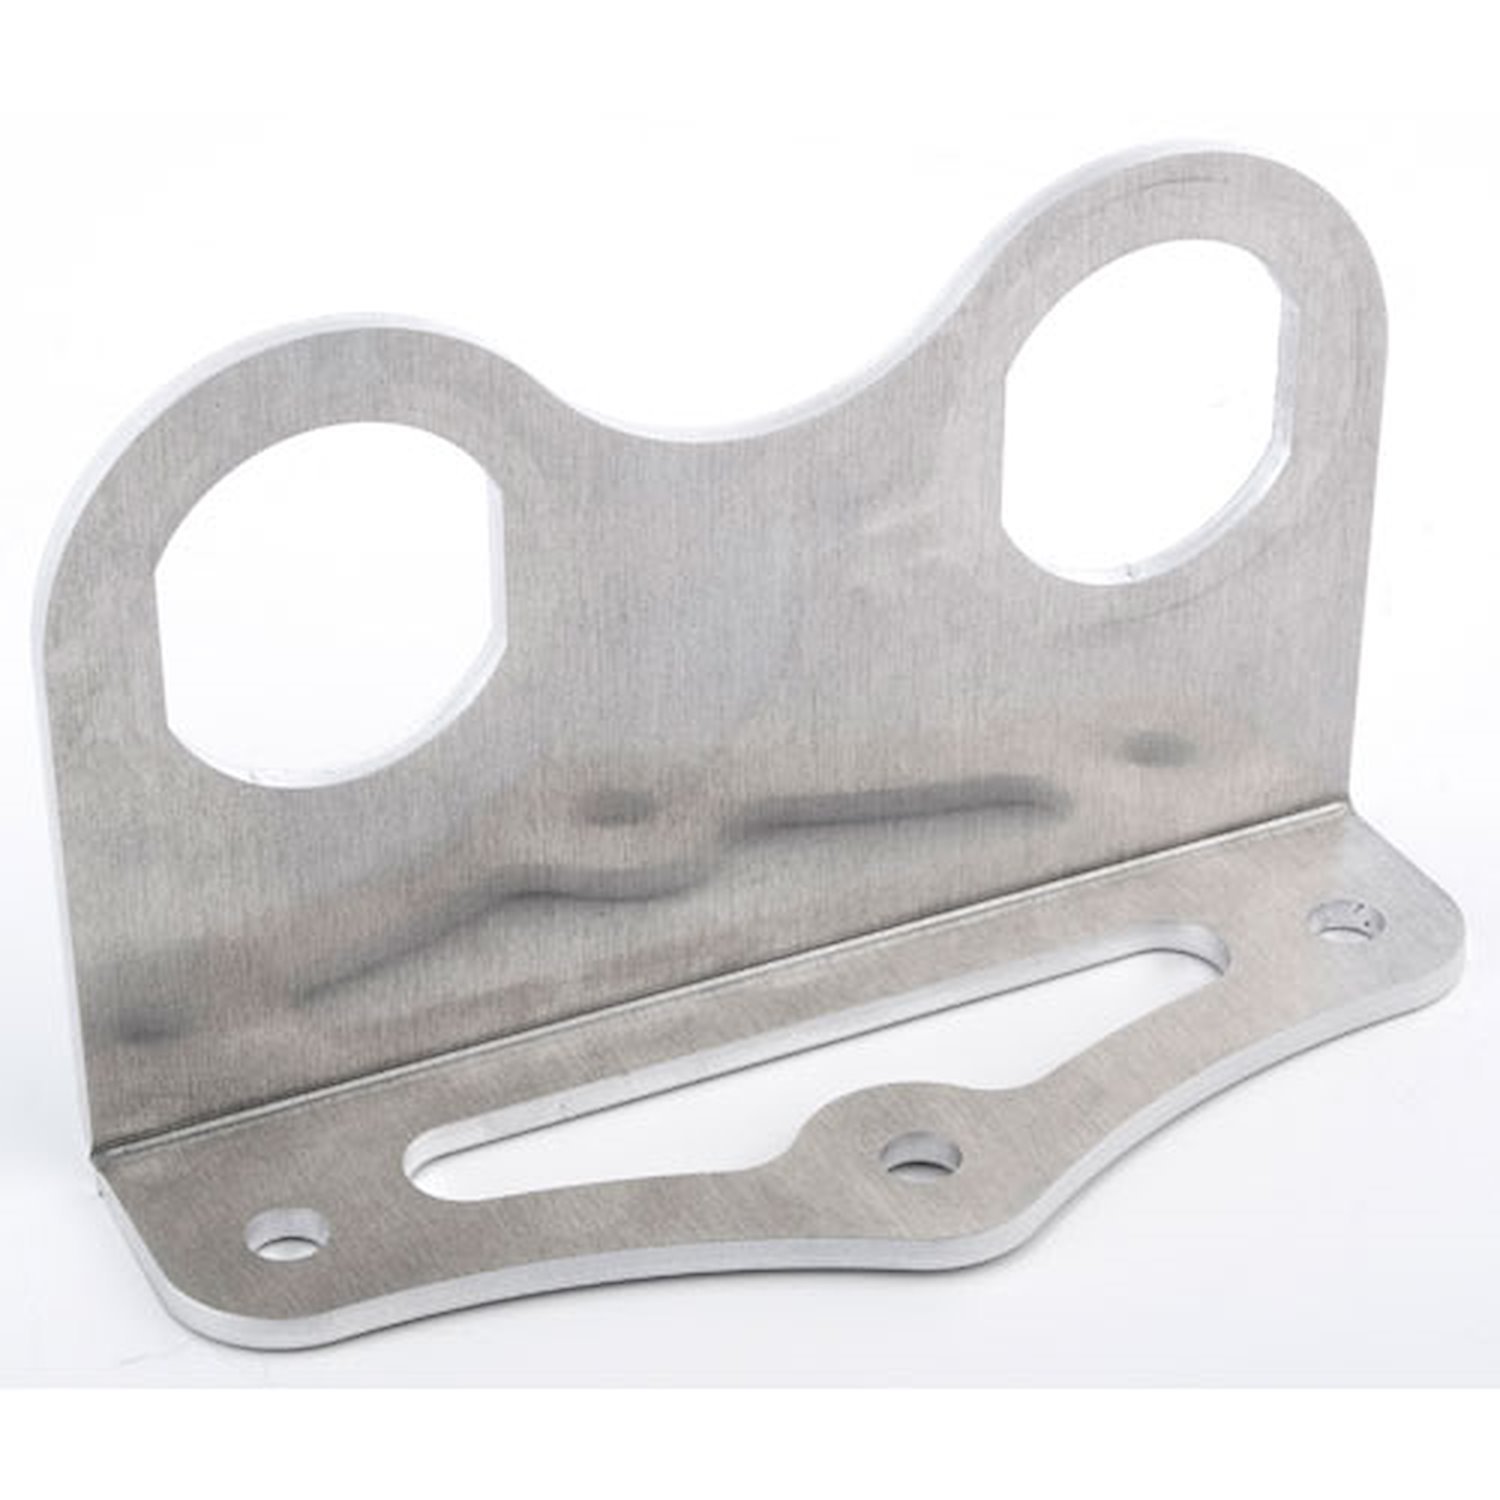 Jumper Terminal Mounting Bracket DD-Shaped Openings (for use with JEGS Terminals 555-10315 and 555-10316)